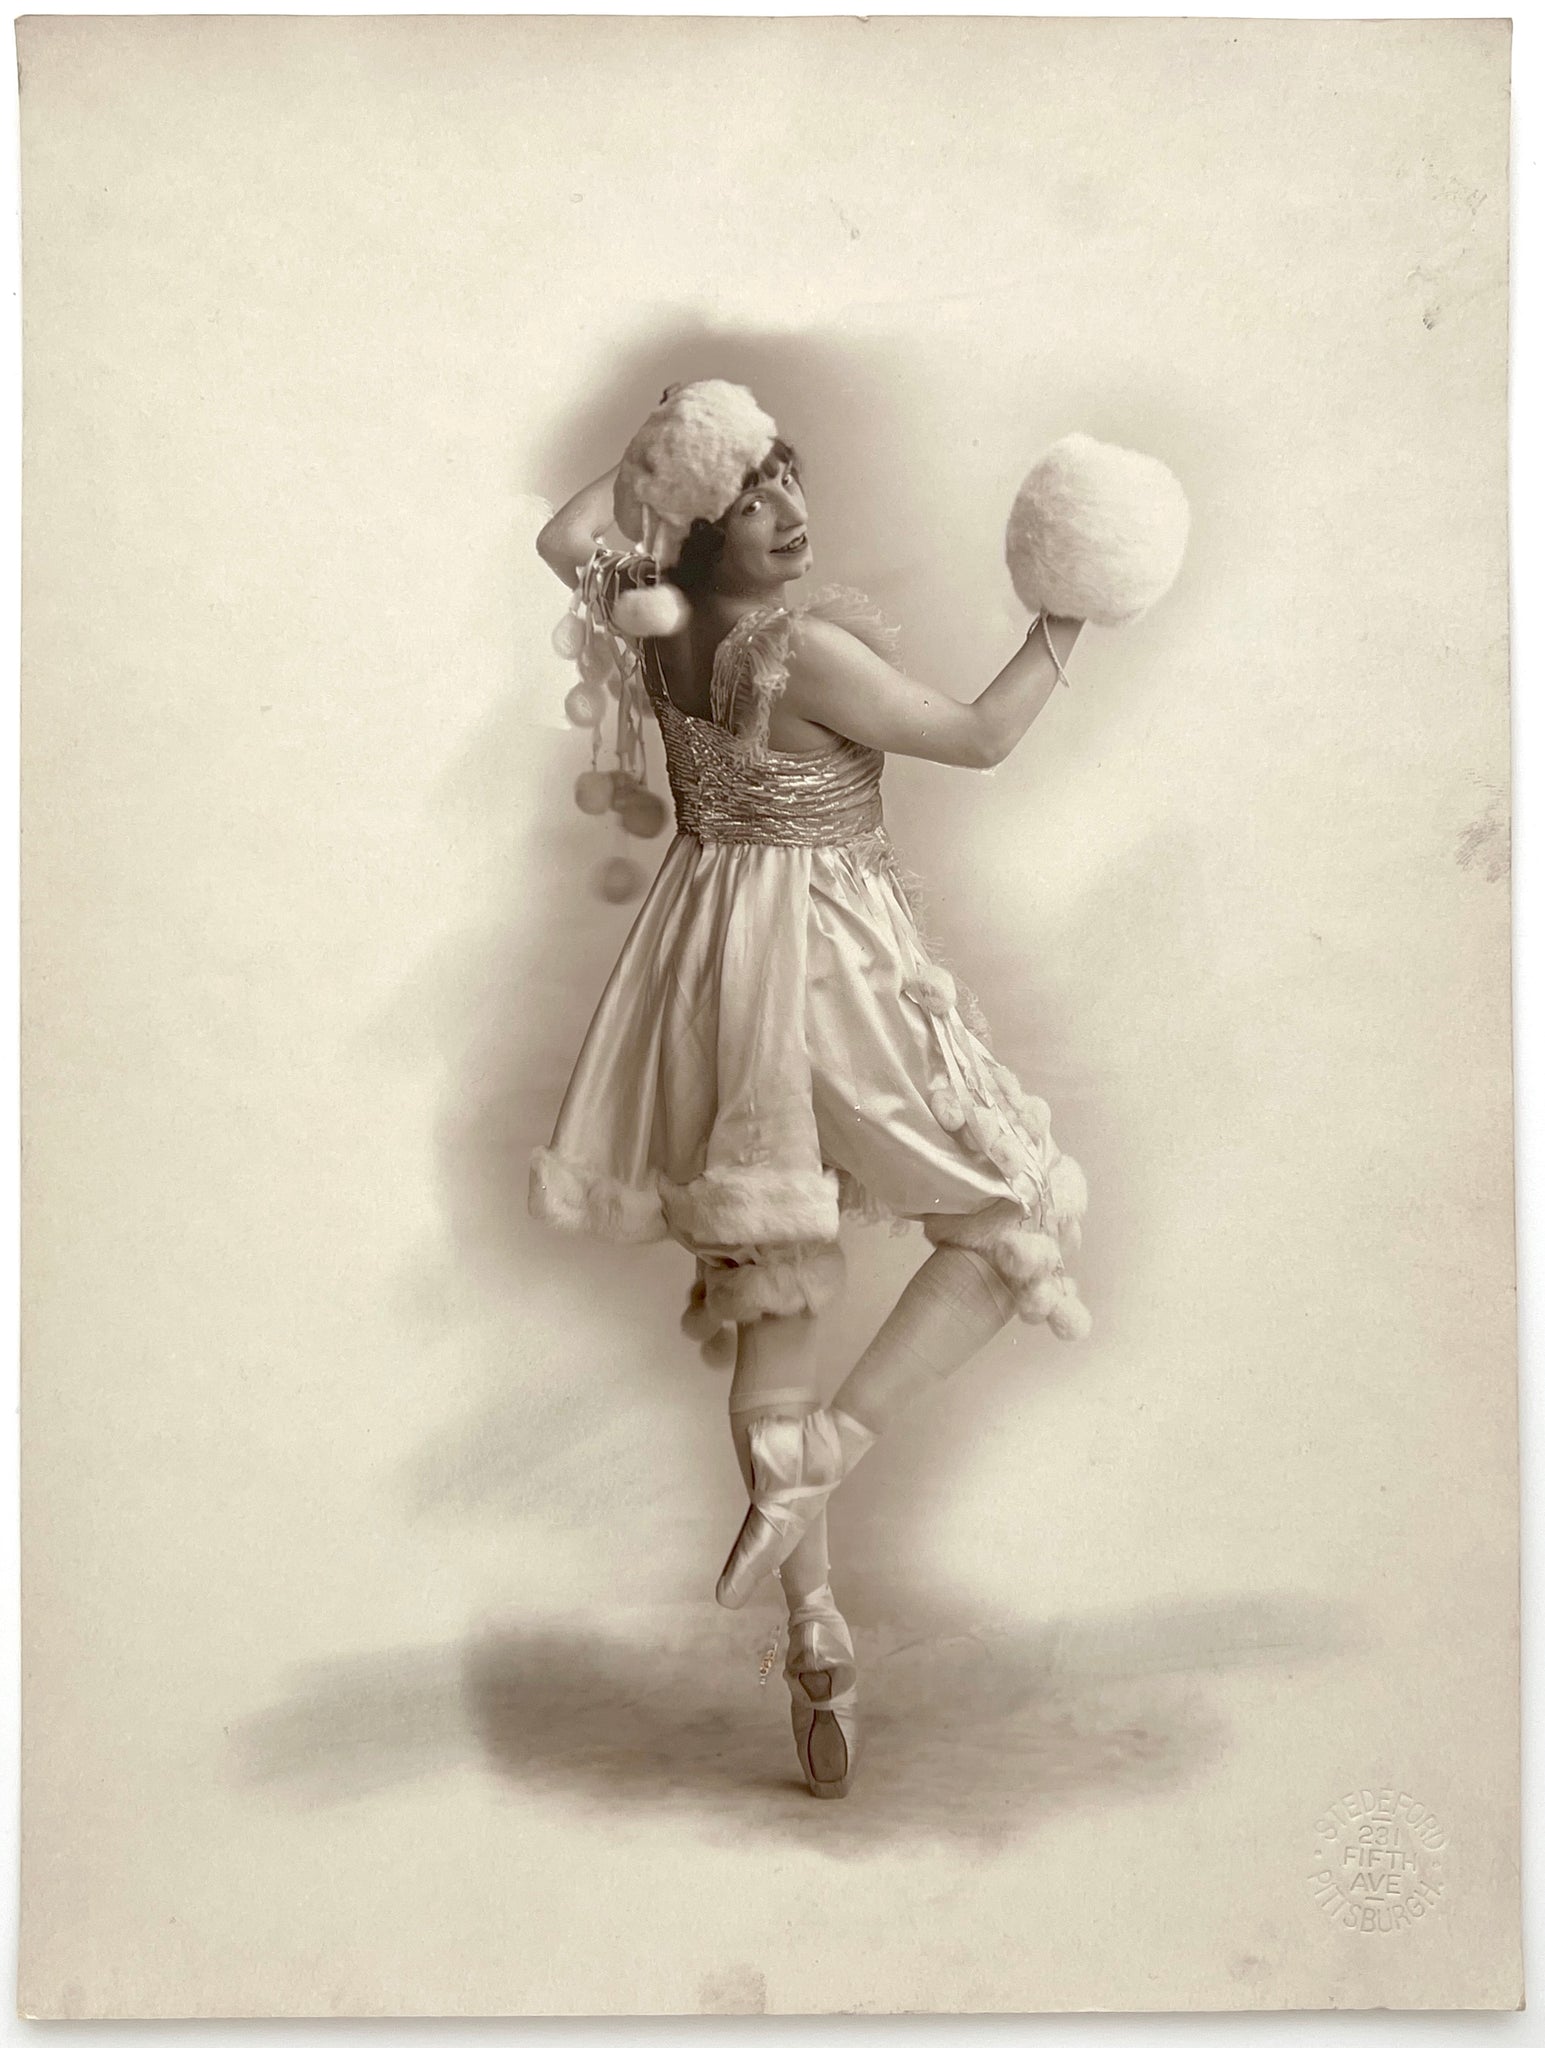 Photograph of an Androgynous Ballerina in Costume